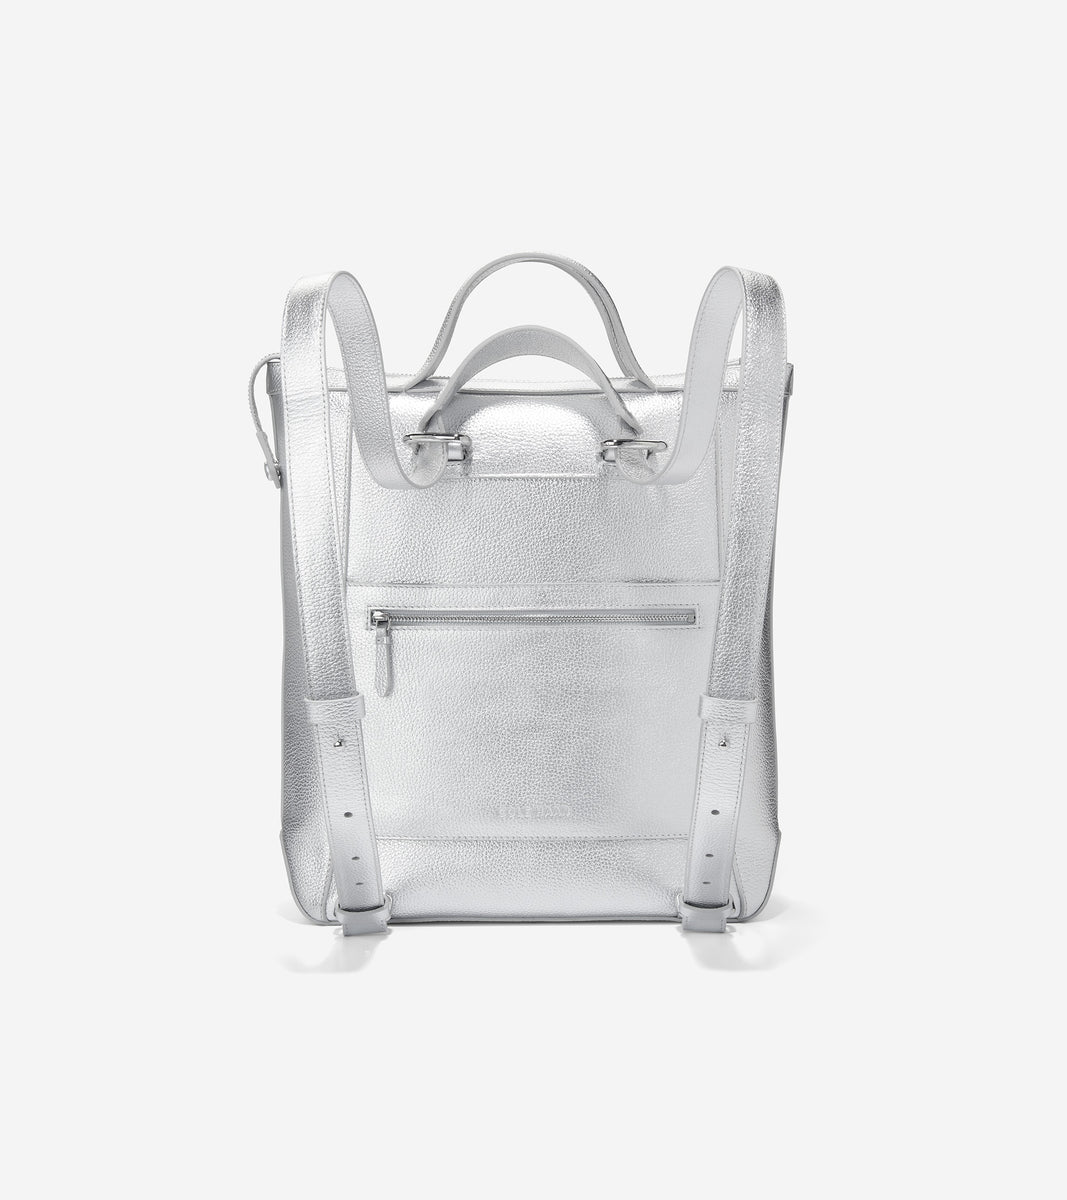 U06447-Grand Ambition Small Convertible Luxe Backpack-Silver